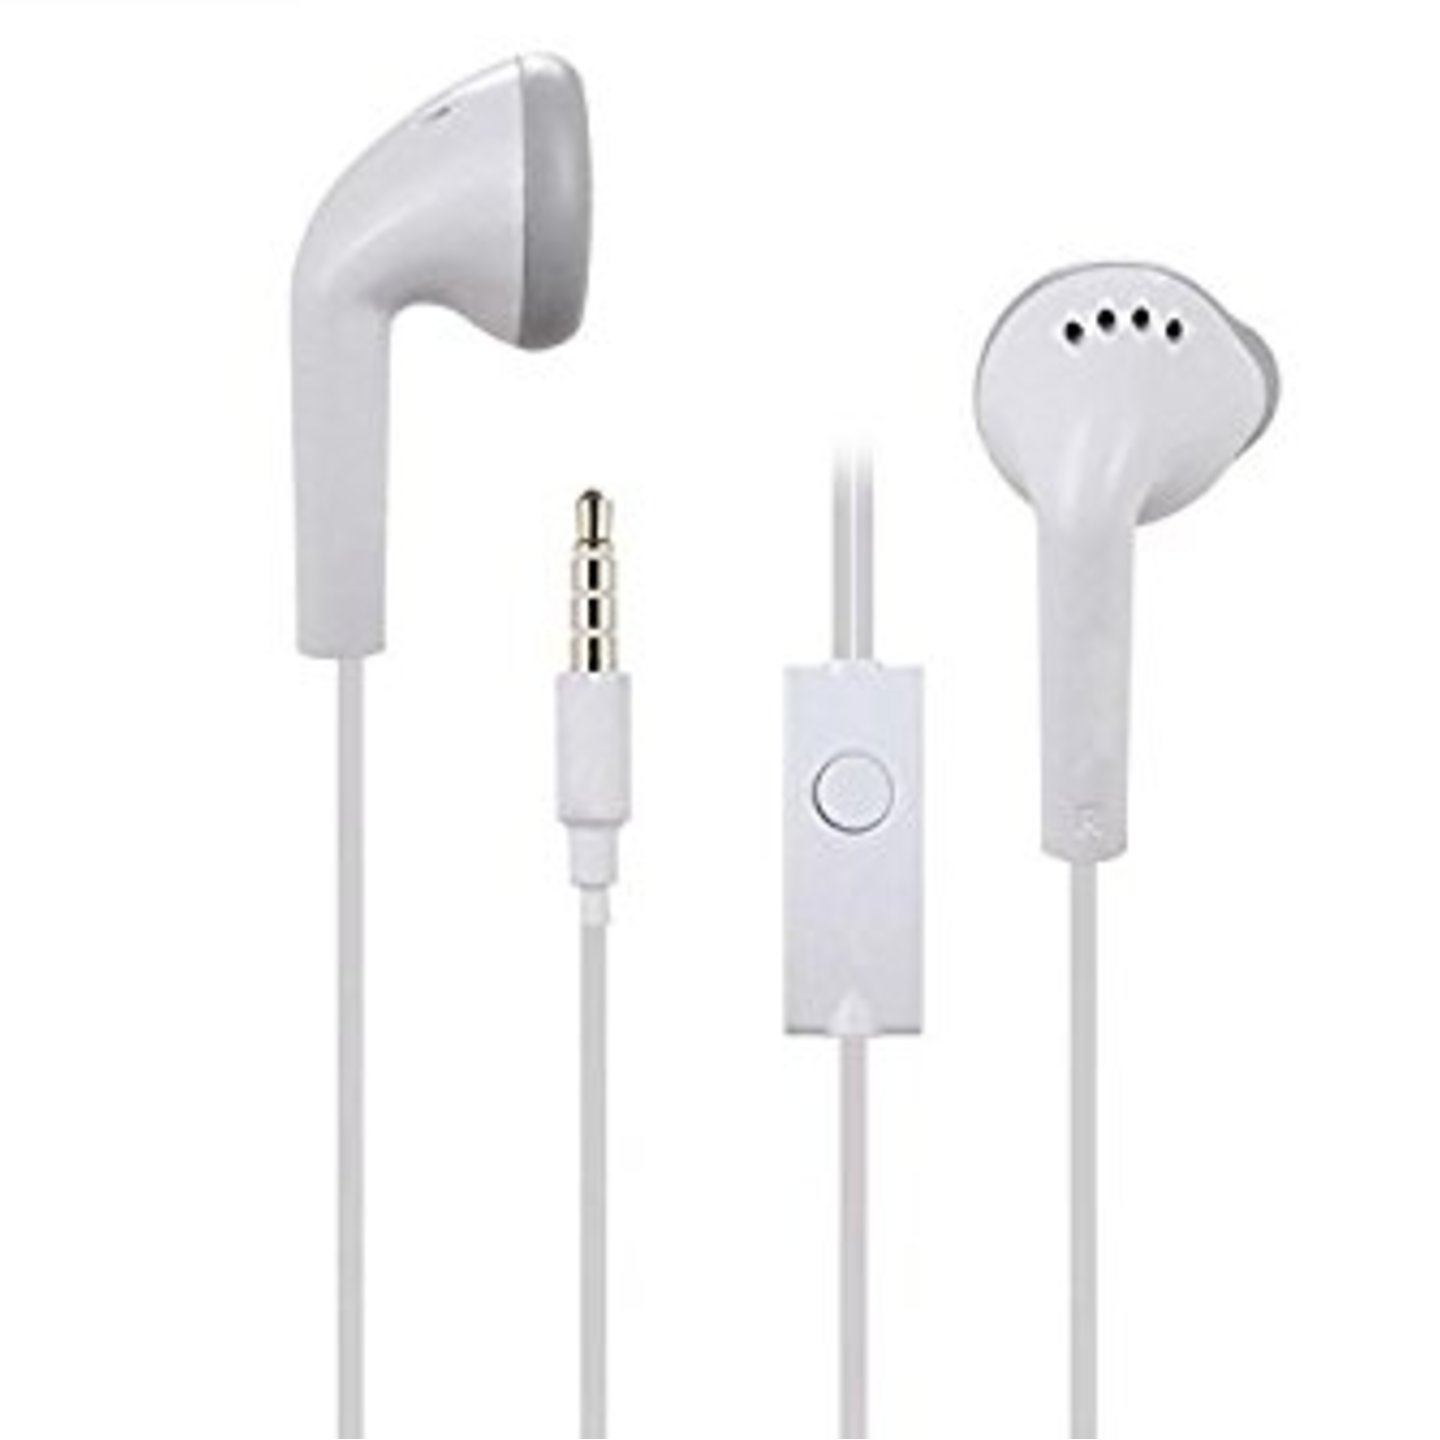 V2N Samsung Headphones YS Earphone With Mic and For Android Smartphones